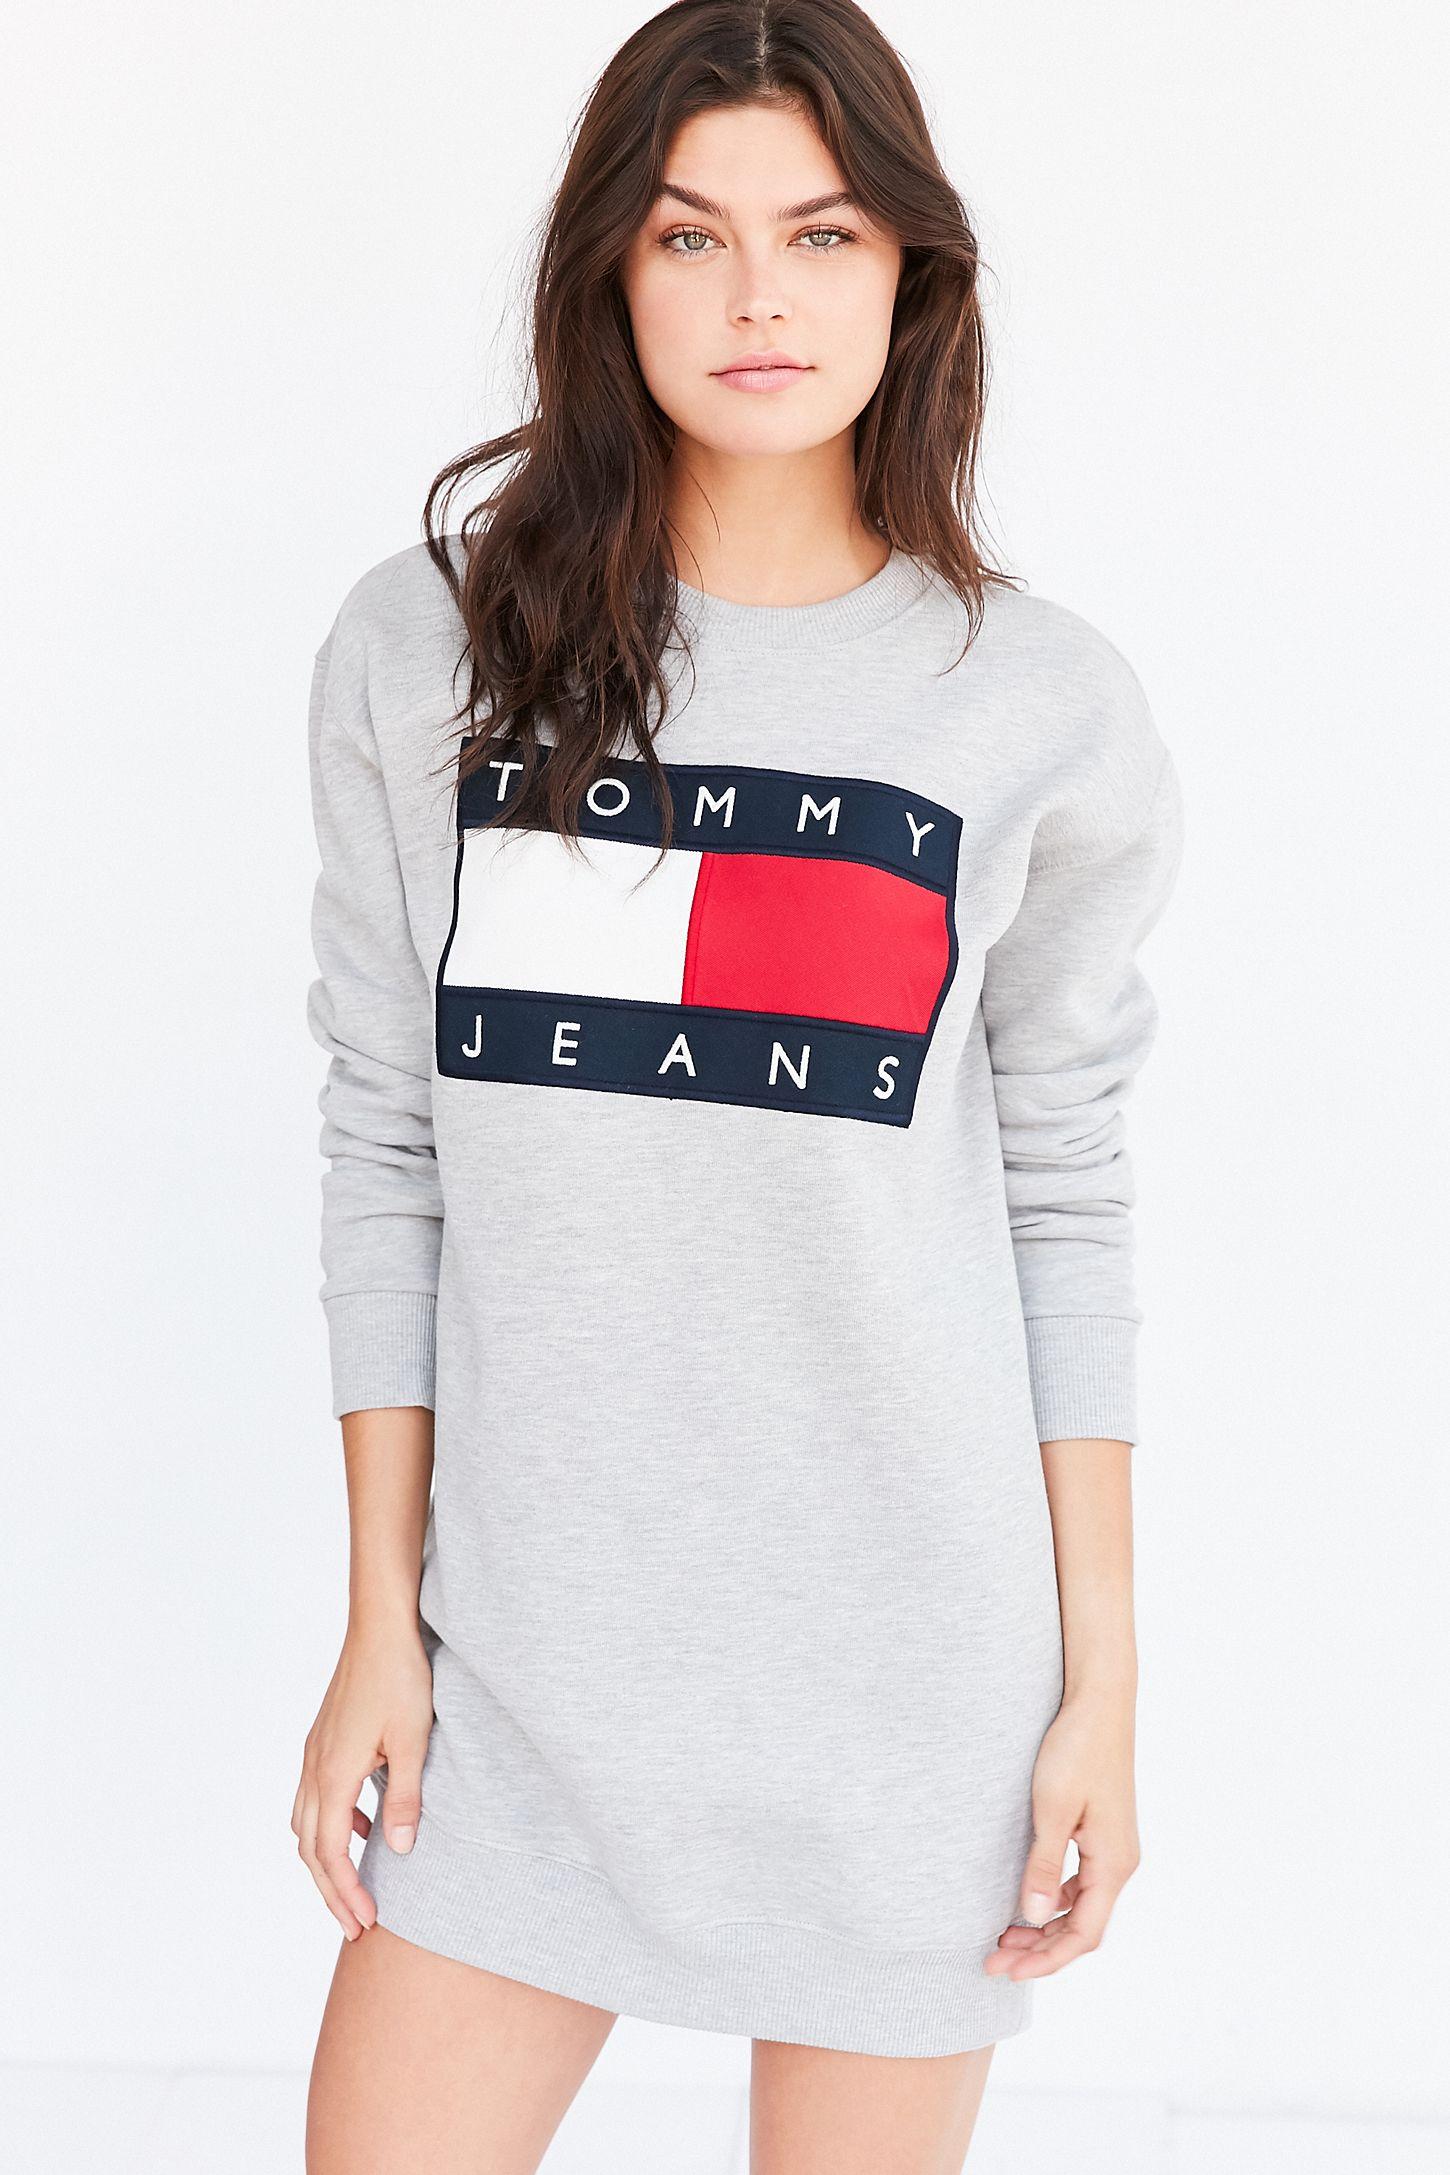 From 90 S Clothing and Apparel Logo - Tommy Jeans For UO '90s Logo Sweatshirt Mini Dress